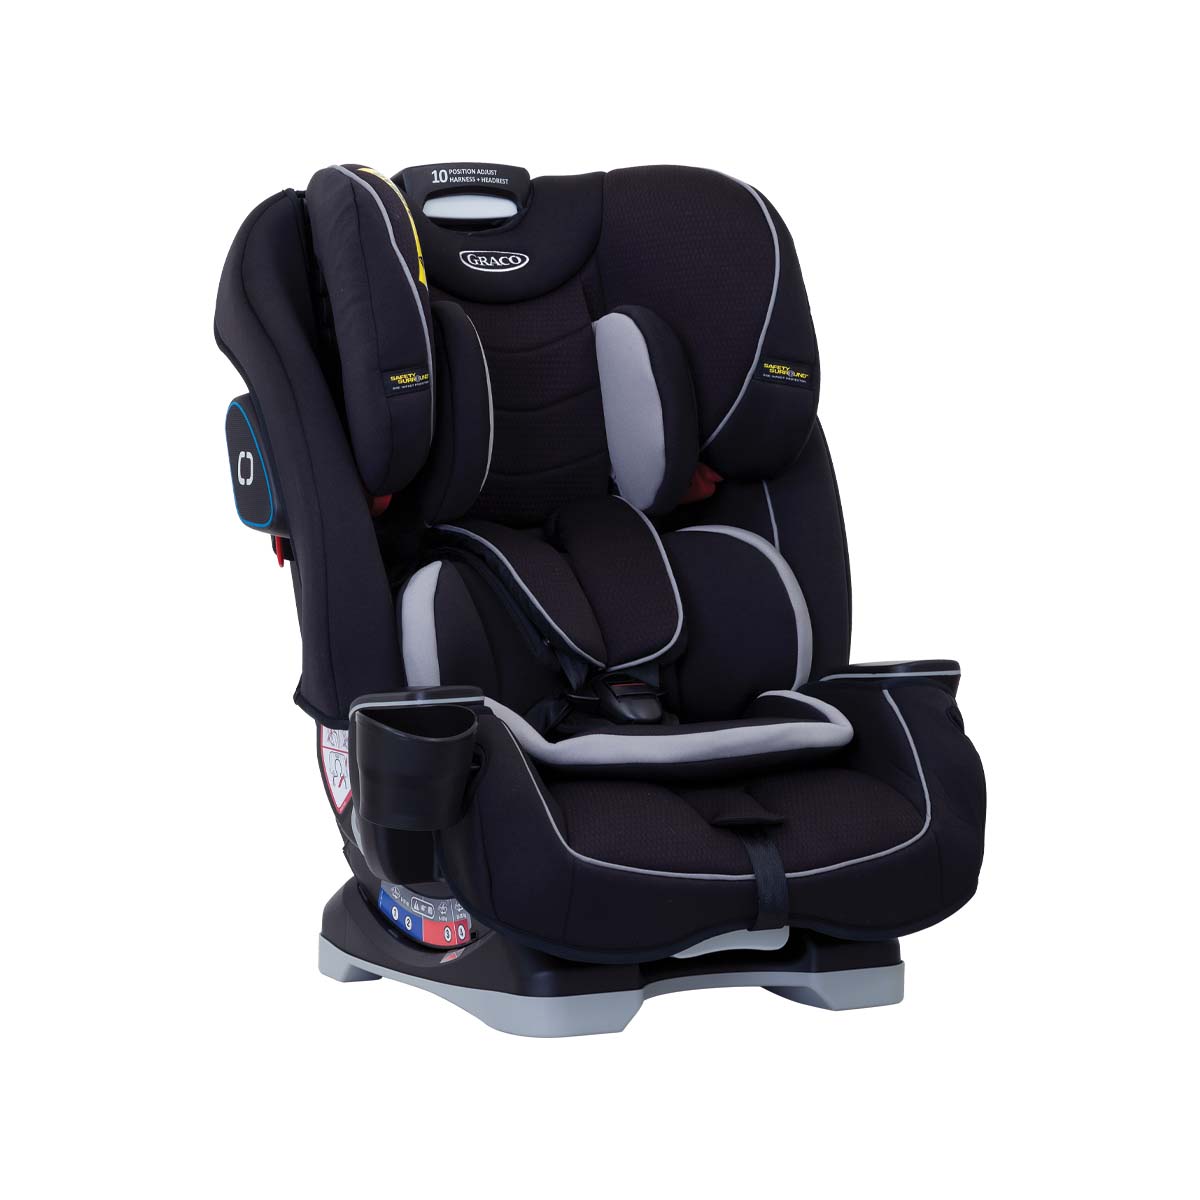 https://dd.gracobaby.eu/media/catalog/product/g/r/graco-slimfit-convertible-carseat-black-three-quarter-angle-prod1_1.jpg?type=product&height=265&width=265